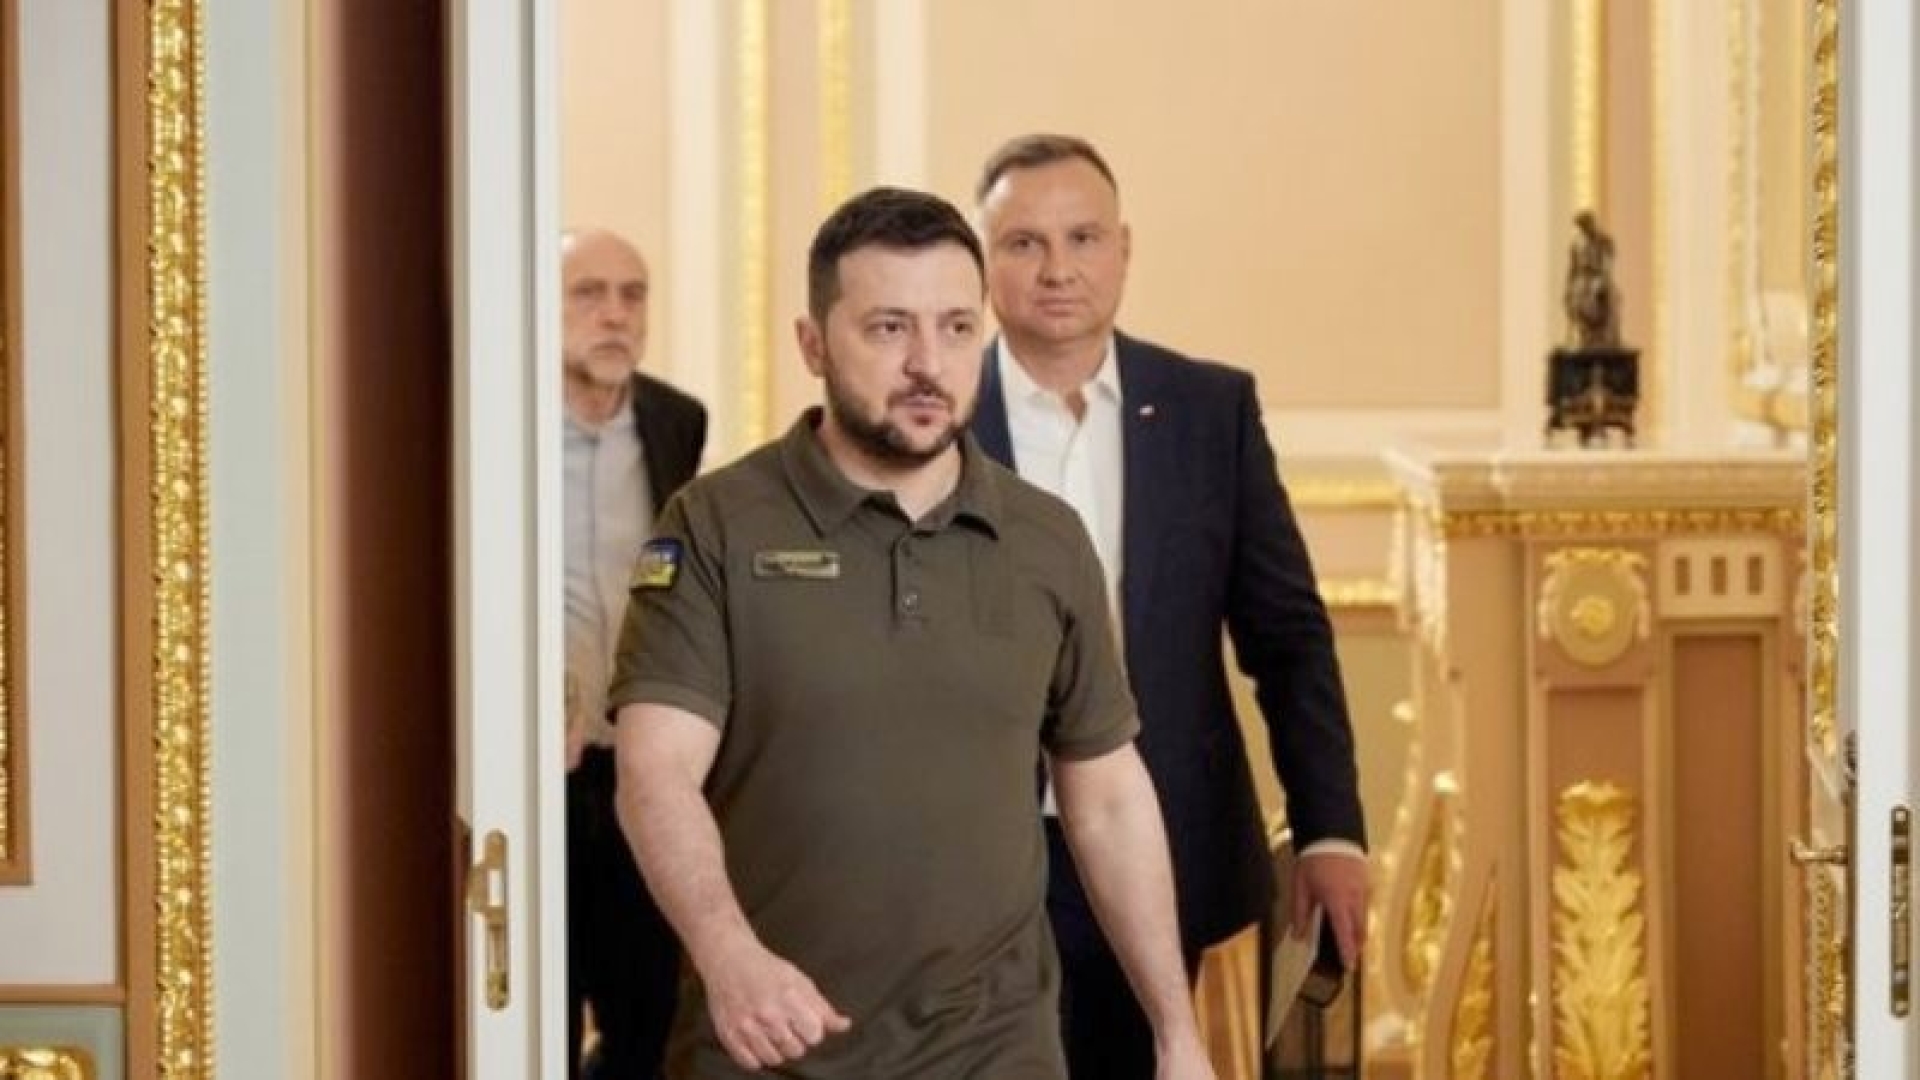 "Status - Defeatists": how Ukraine is "friends" with Poland (and vice versa)